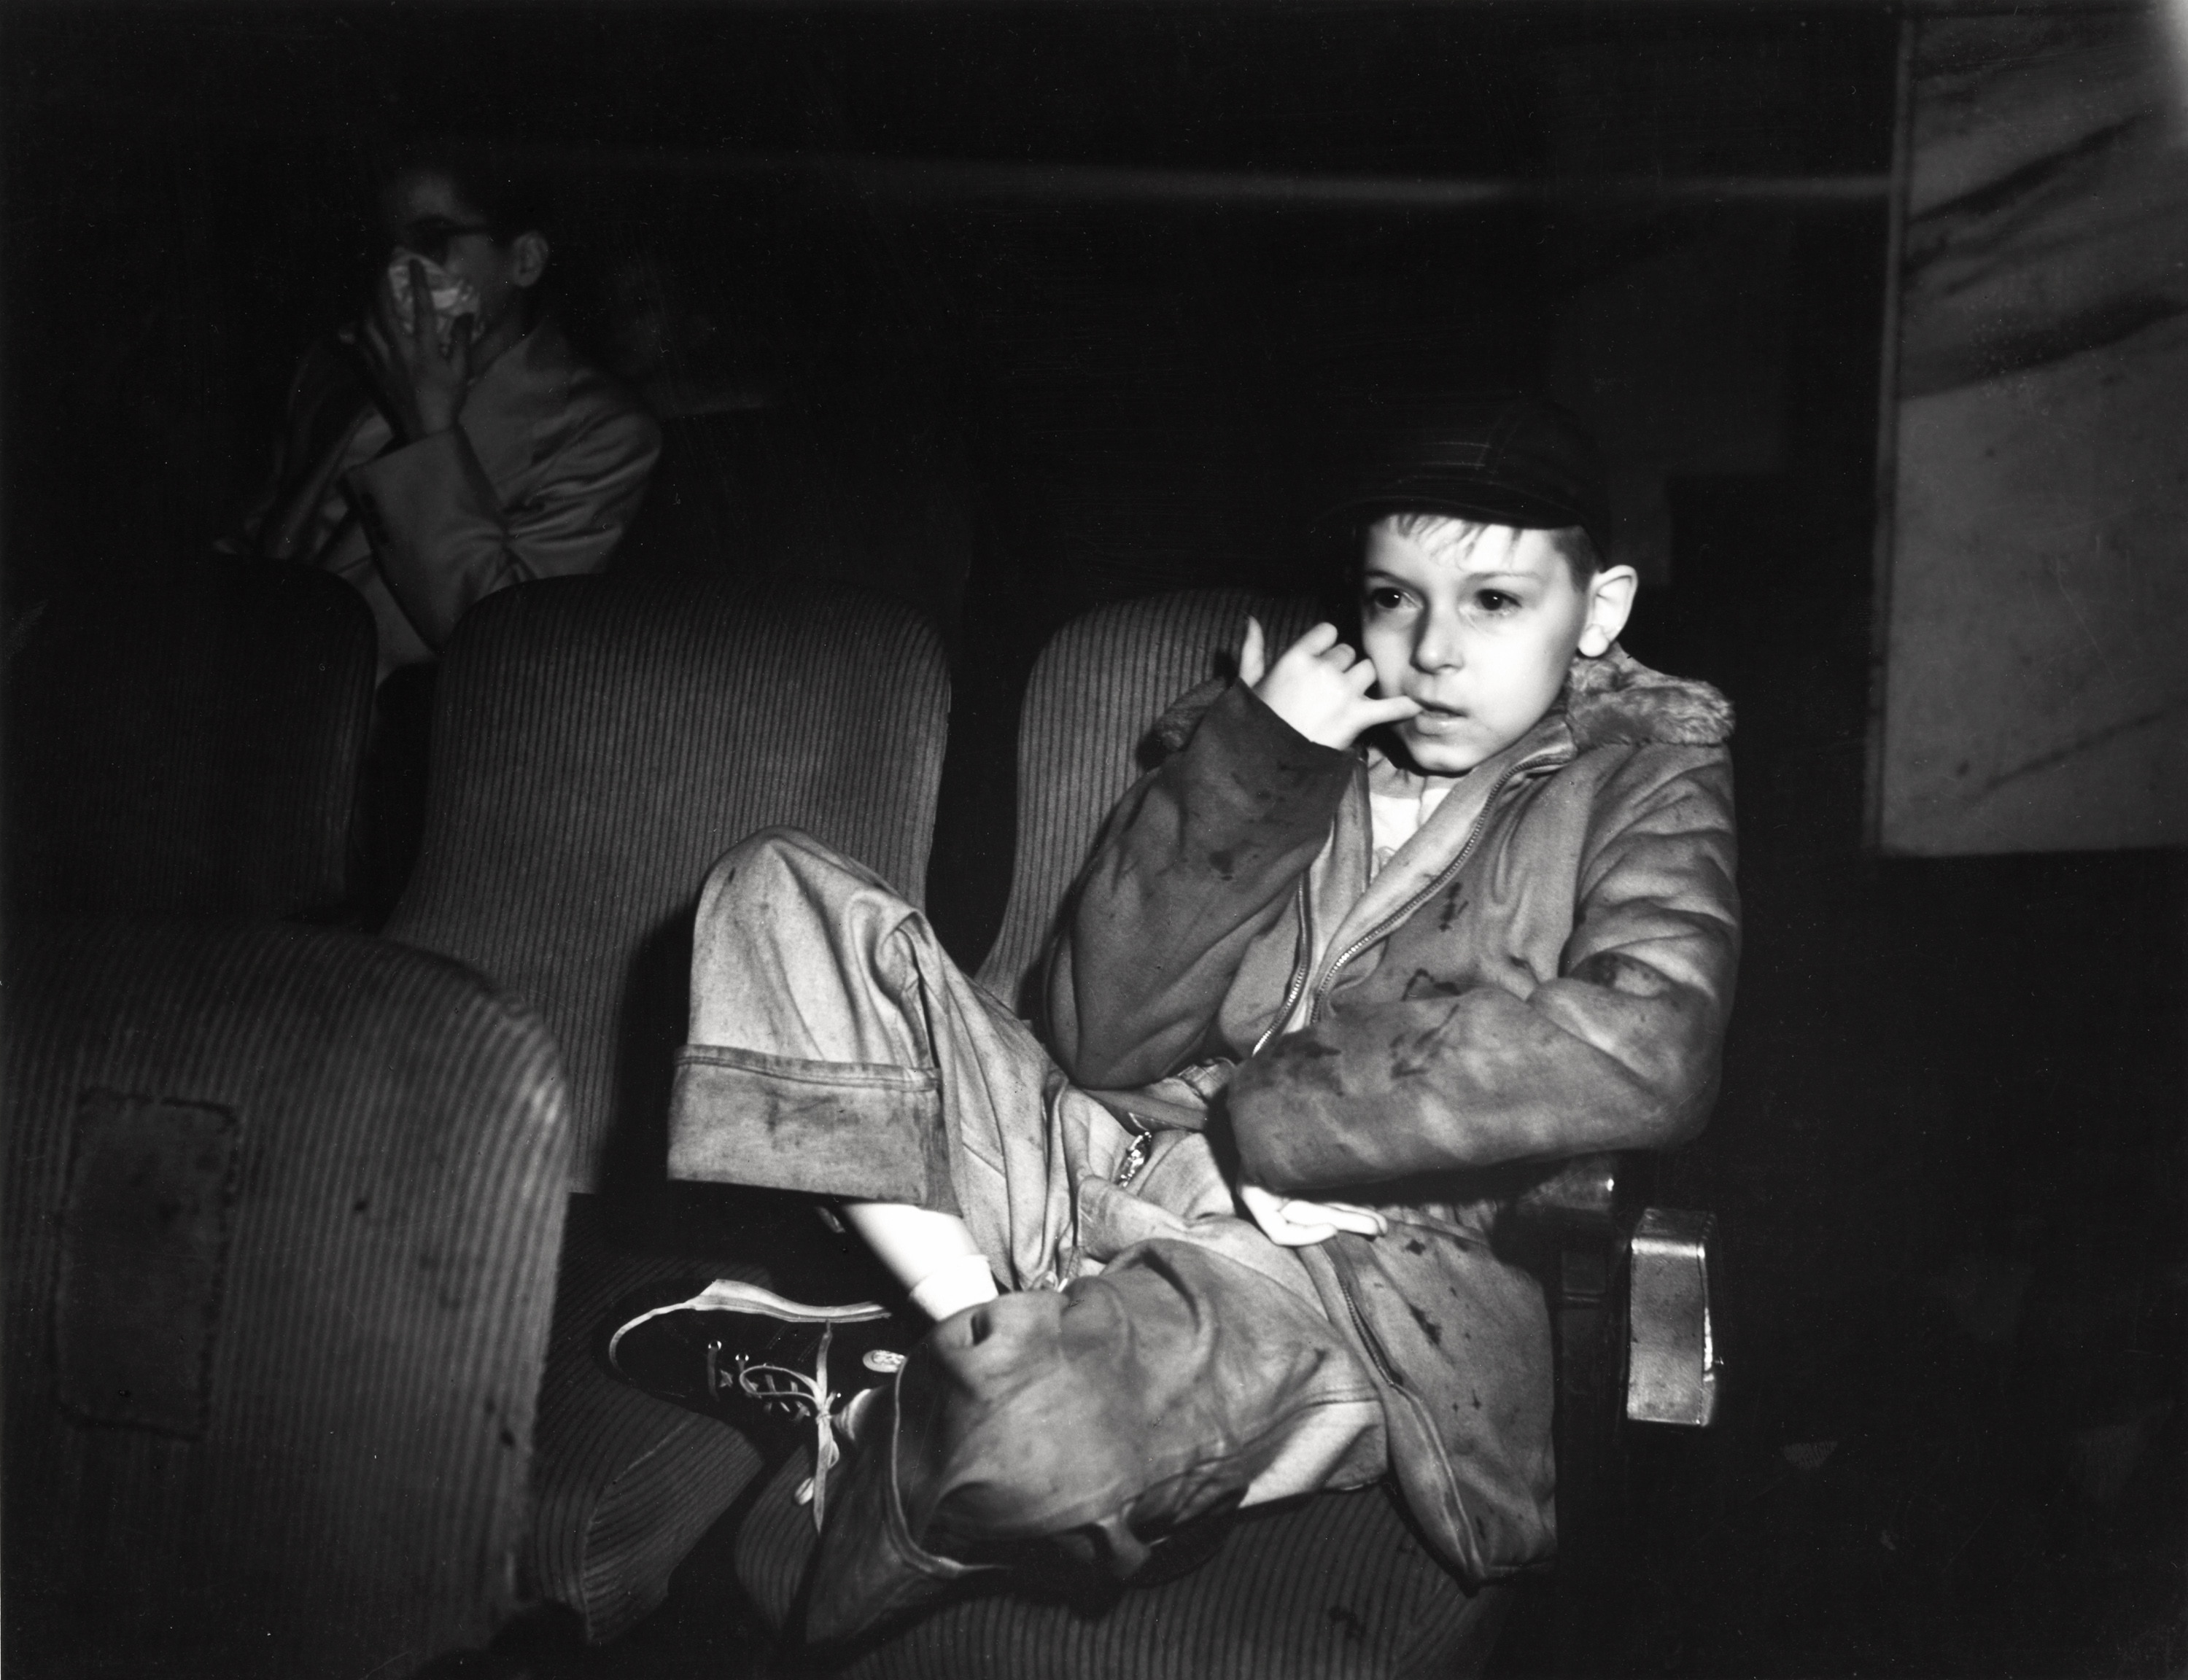 WATCHING: Boy with finger in his mouth, New York, ca. 1943. © Weegee/ International Center of Photography